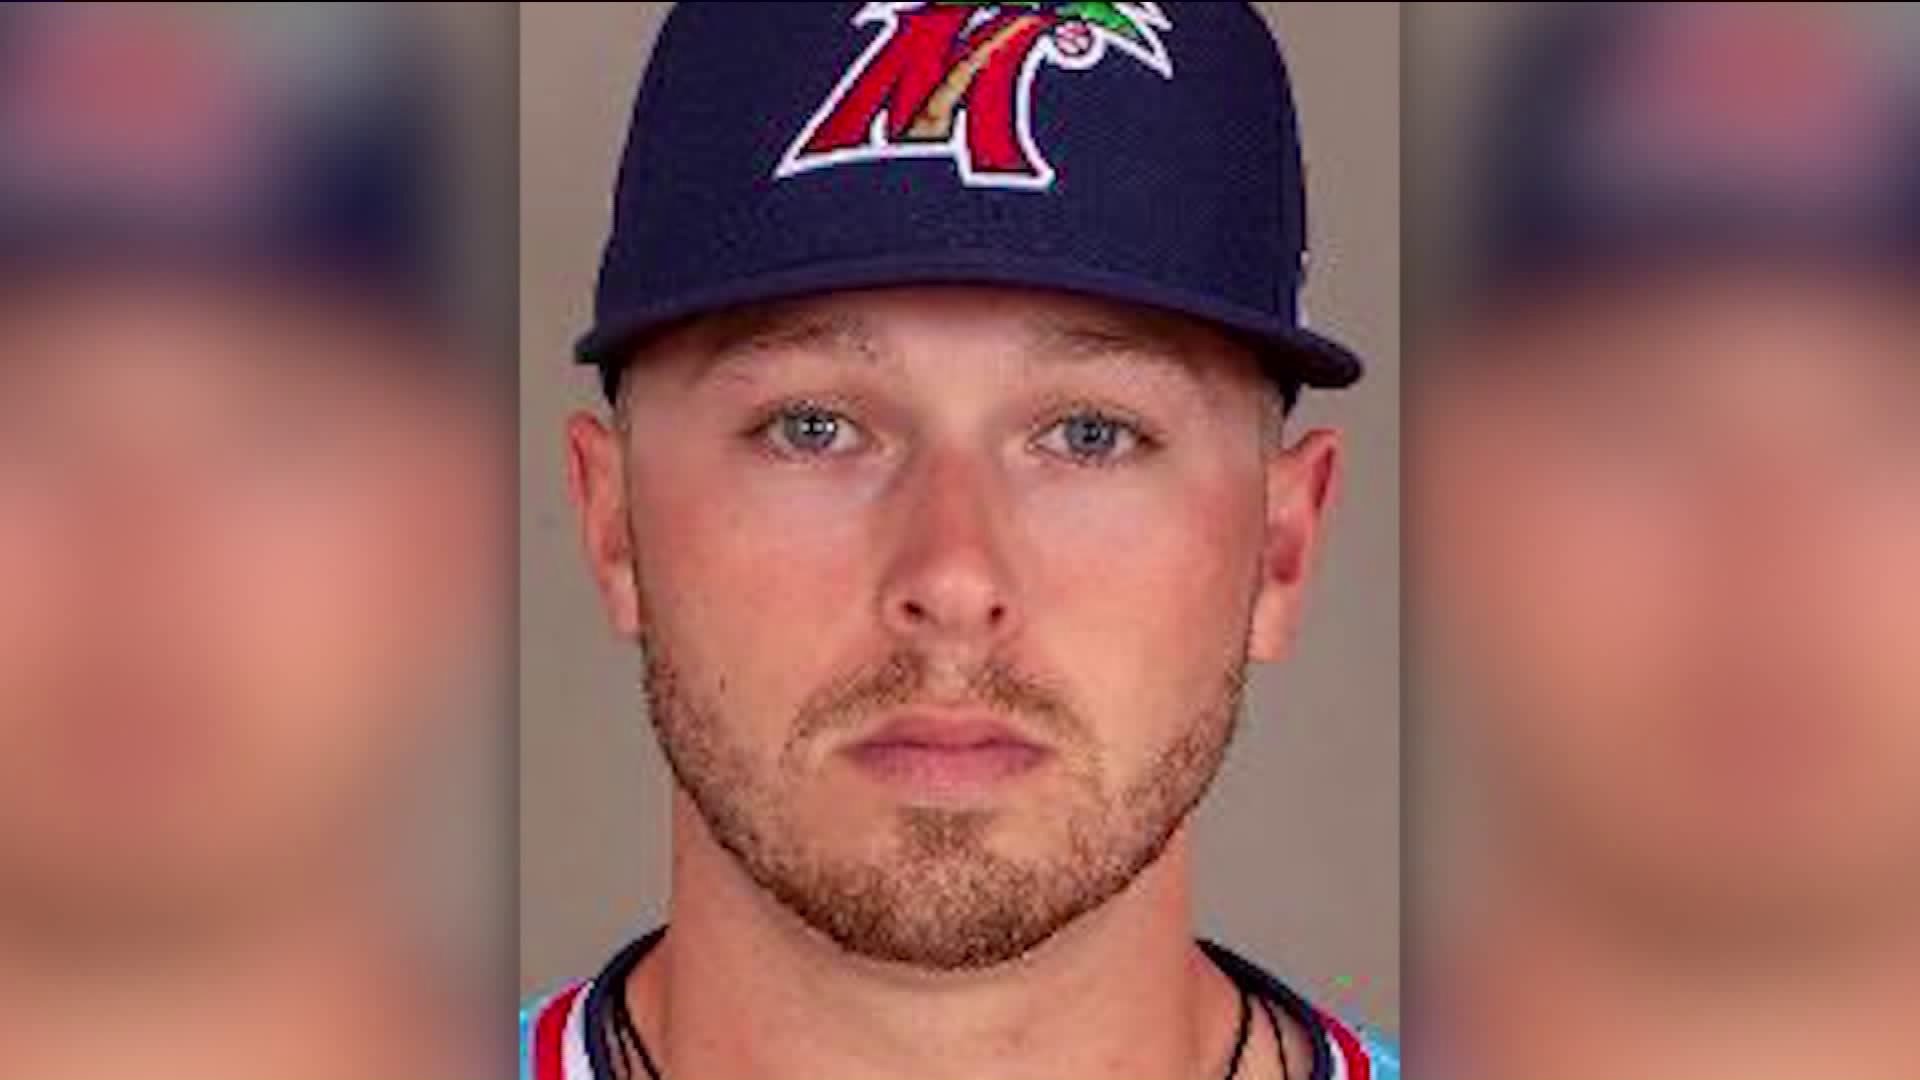 Connecticut native and Minnesota Twins prospect Ryan Costello found dead in New Zealand